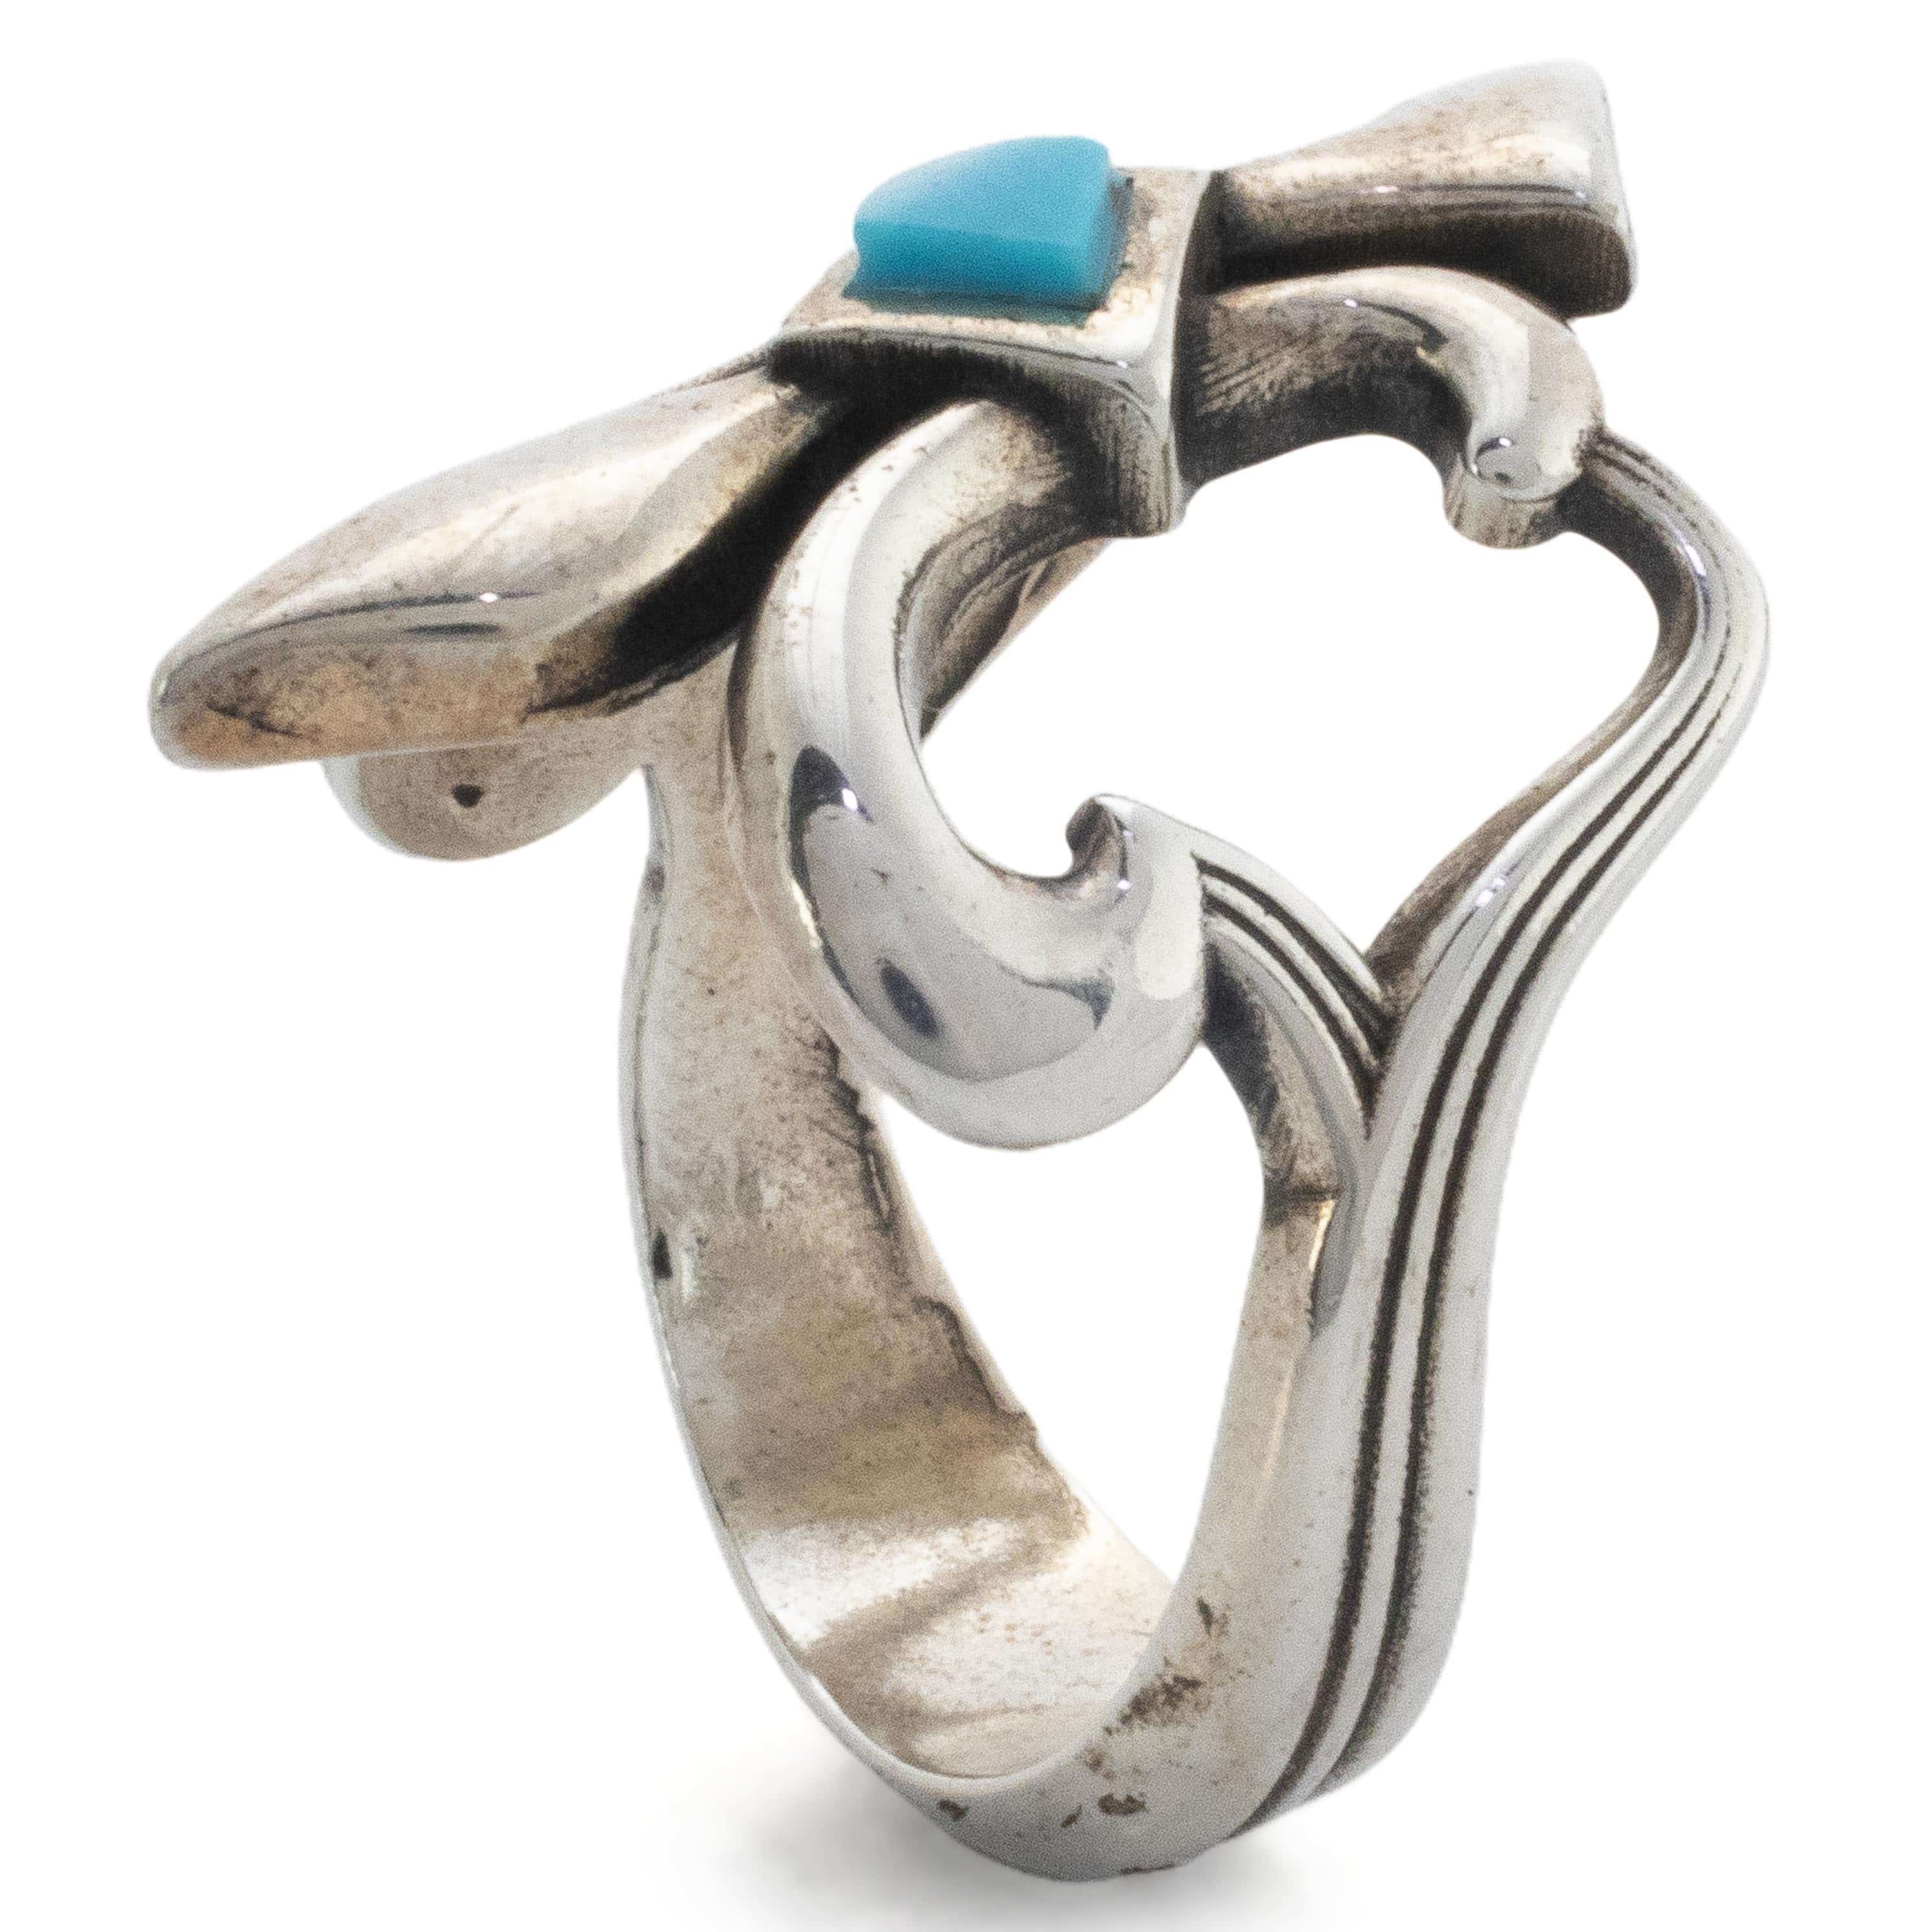 Kalifano Native American Jewelry 7 Kingman Turquoise USA Native American Made 925 Sterling Silver Ring NAR400.104.7